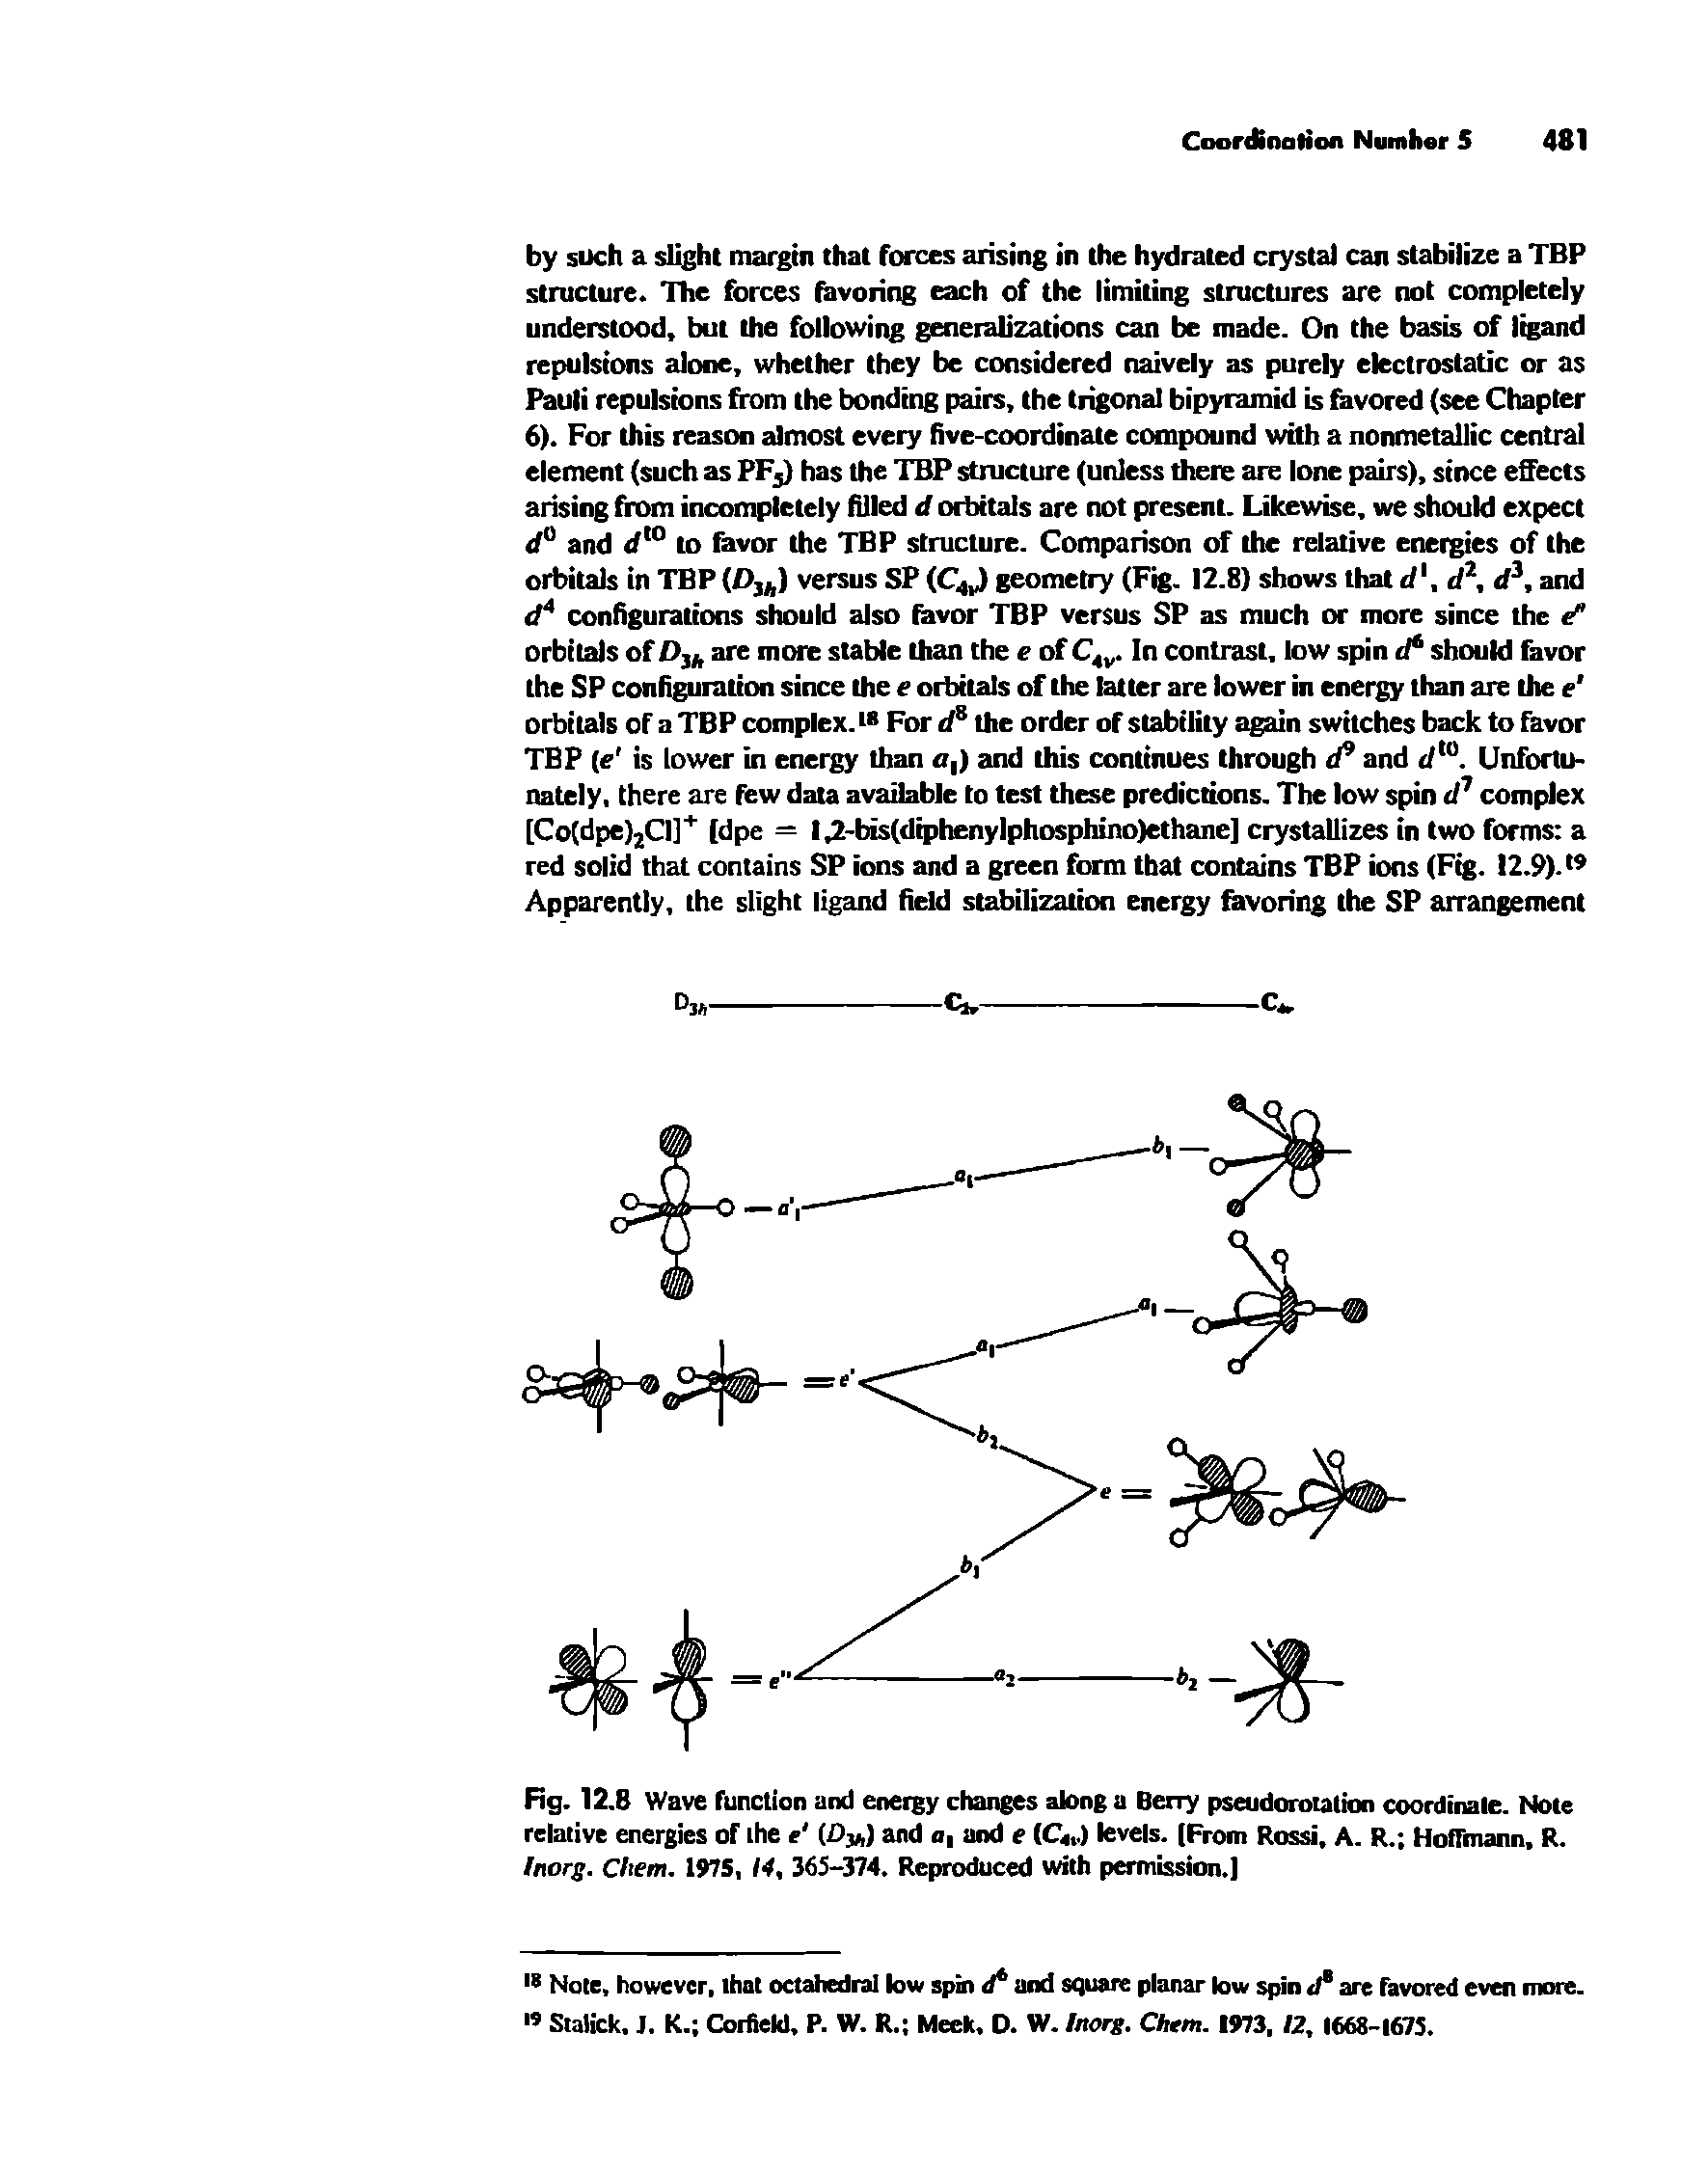 Fig. 12.8 Wave function and energy changes along a Berry pseudorotation coordinate. Note relative energies of the e ( >w) and a, and e (C .) levels. (From Rossi, A. R. Hoffmann, R. Inorg. Chem. 1975, 14, 365-374. Reproduced with permission.)...